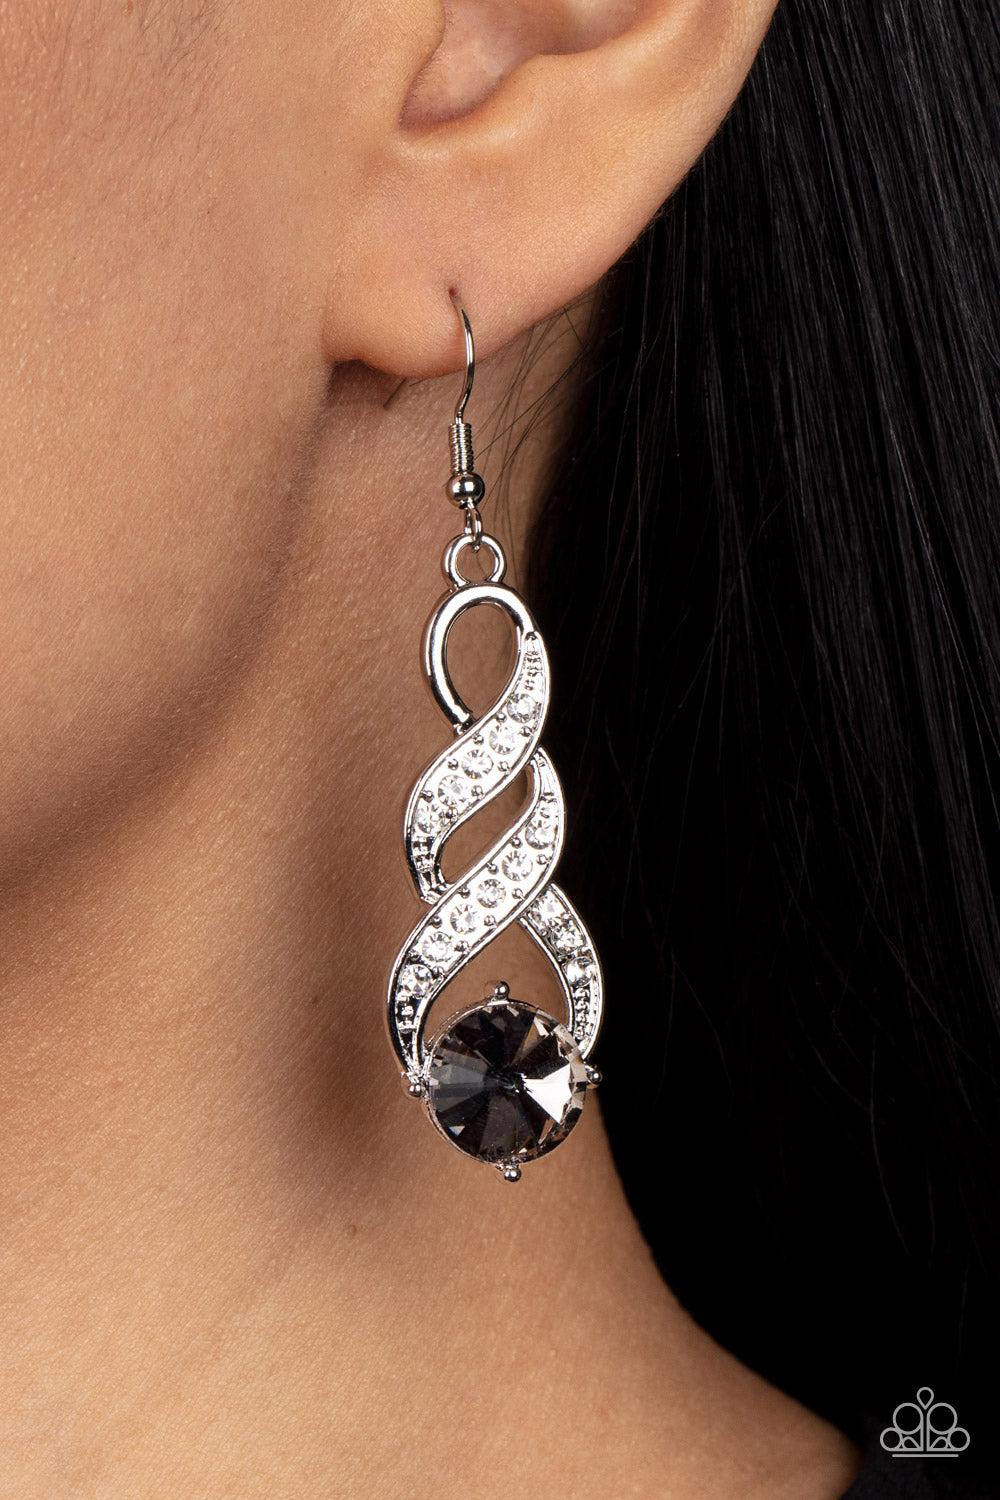 High-Ranking Royalty Silver Rhinestone Earrings - Paparazzi Accessories- lightbox - CarasShop.com - $5 Jewelry by Cara Jewels